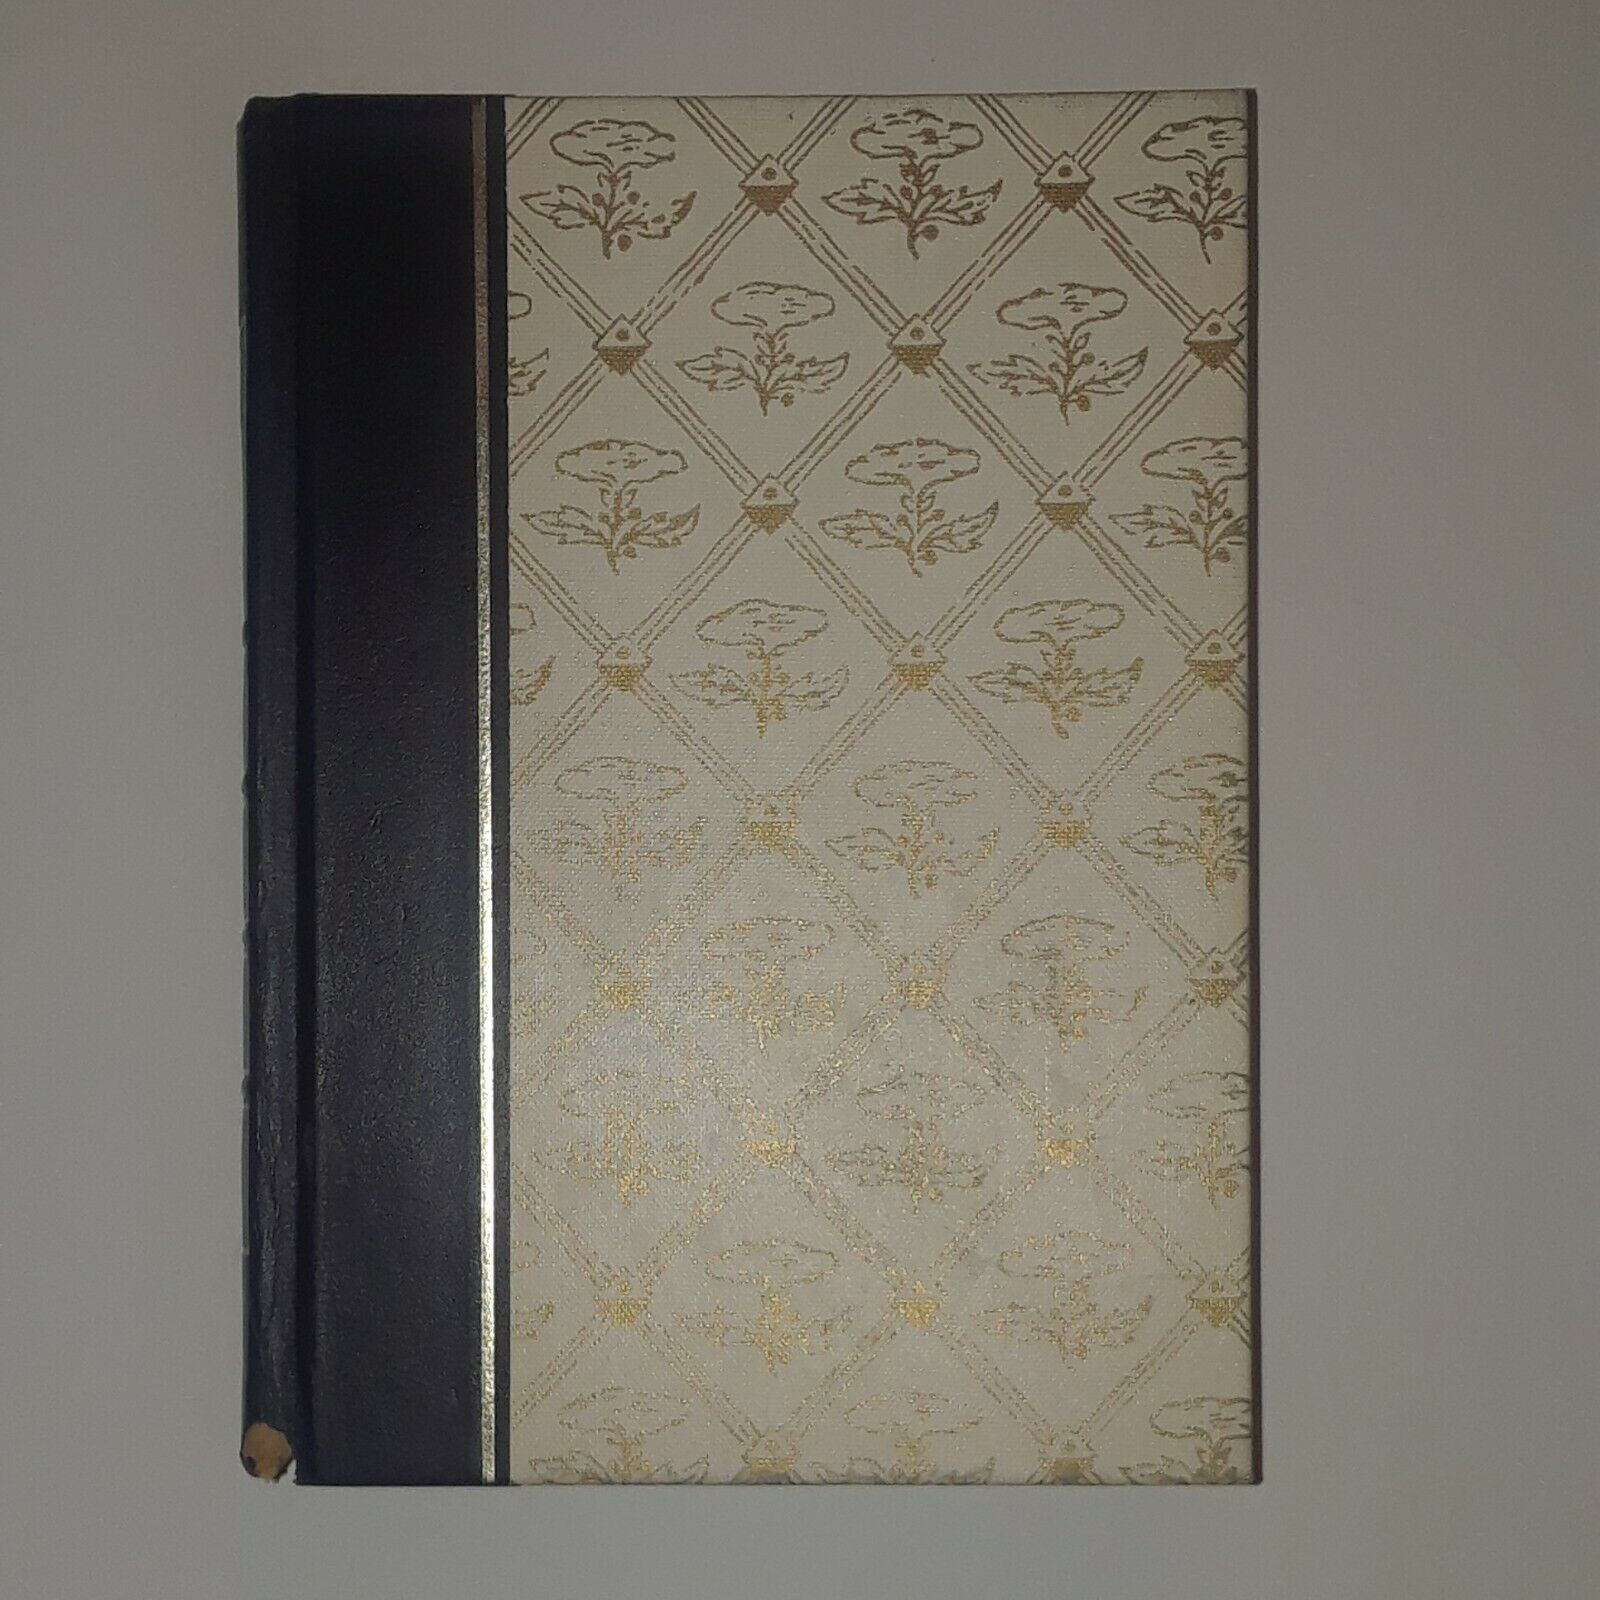 Best Sellers From Readers Digest Condensed Books 1967 First Edition Hardcover